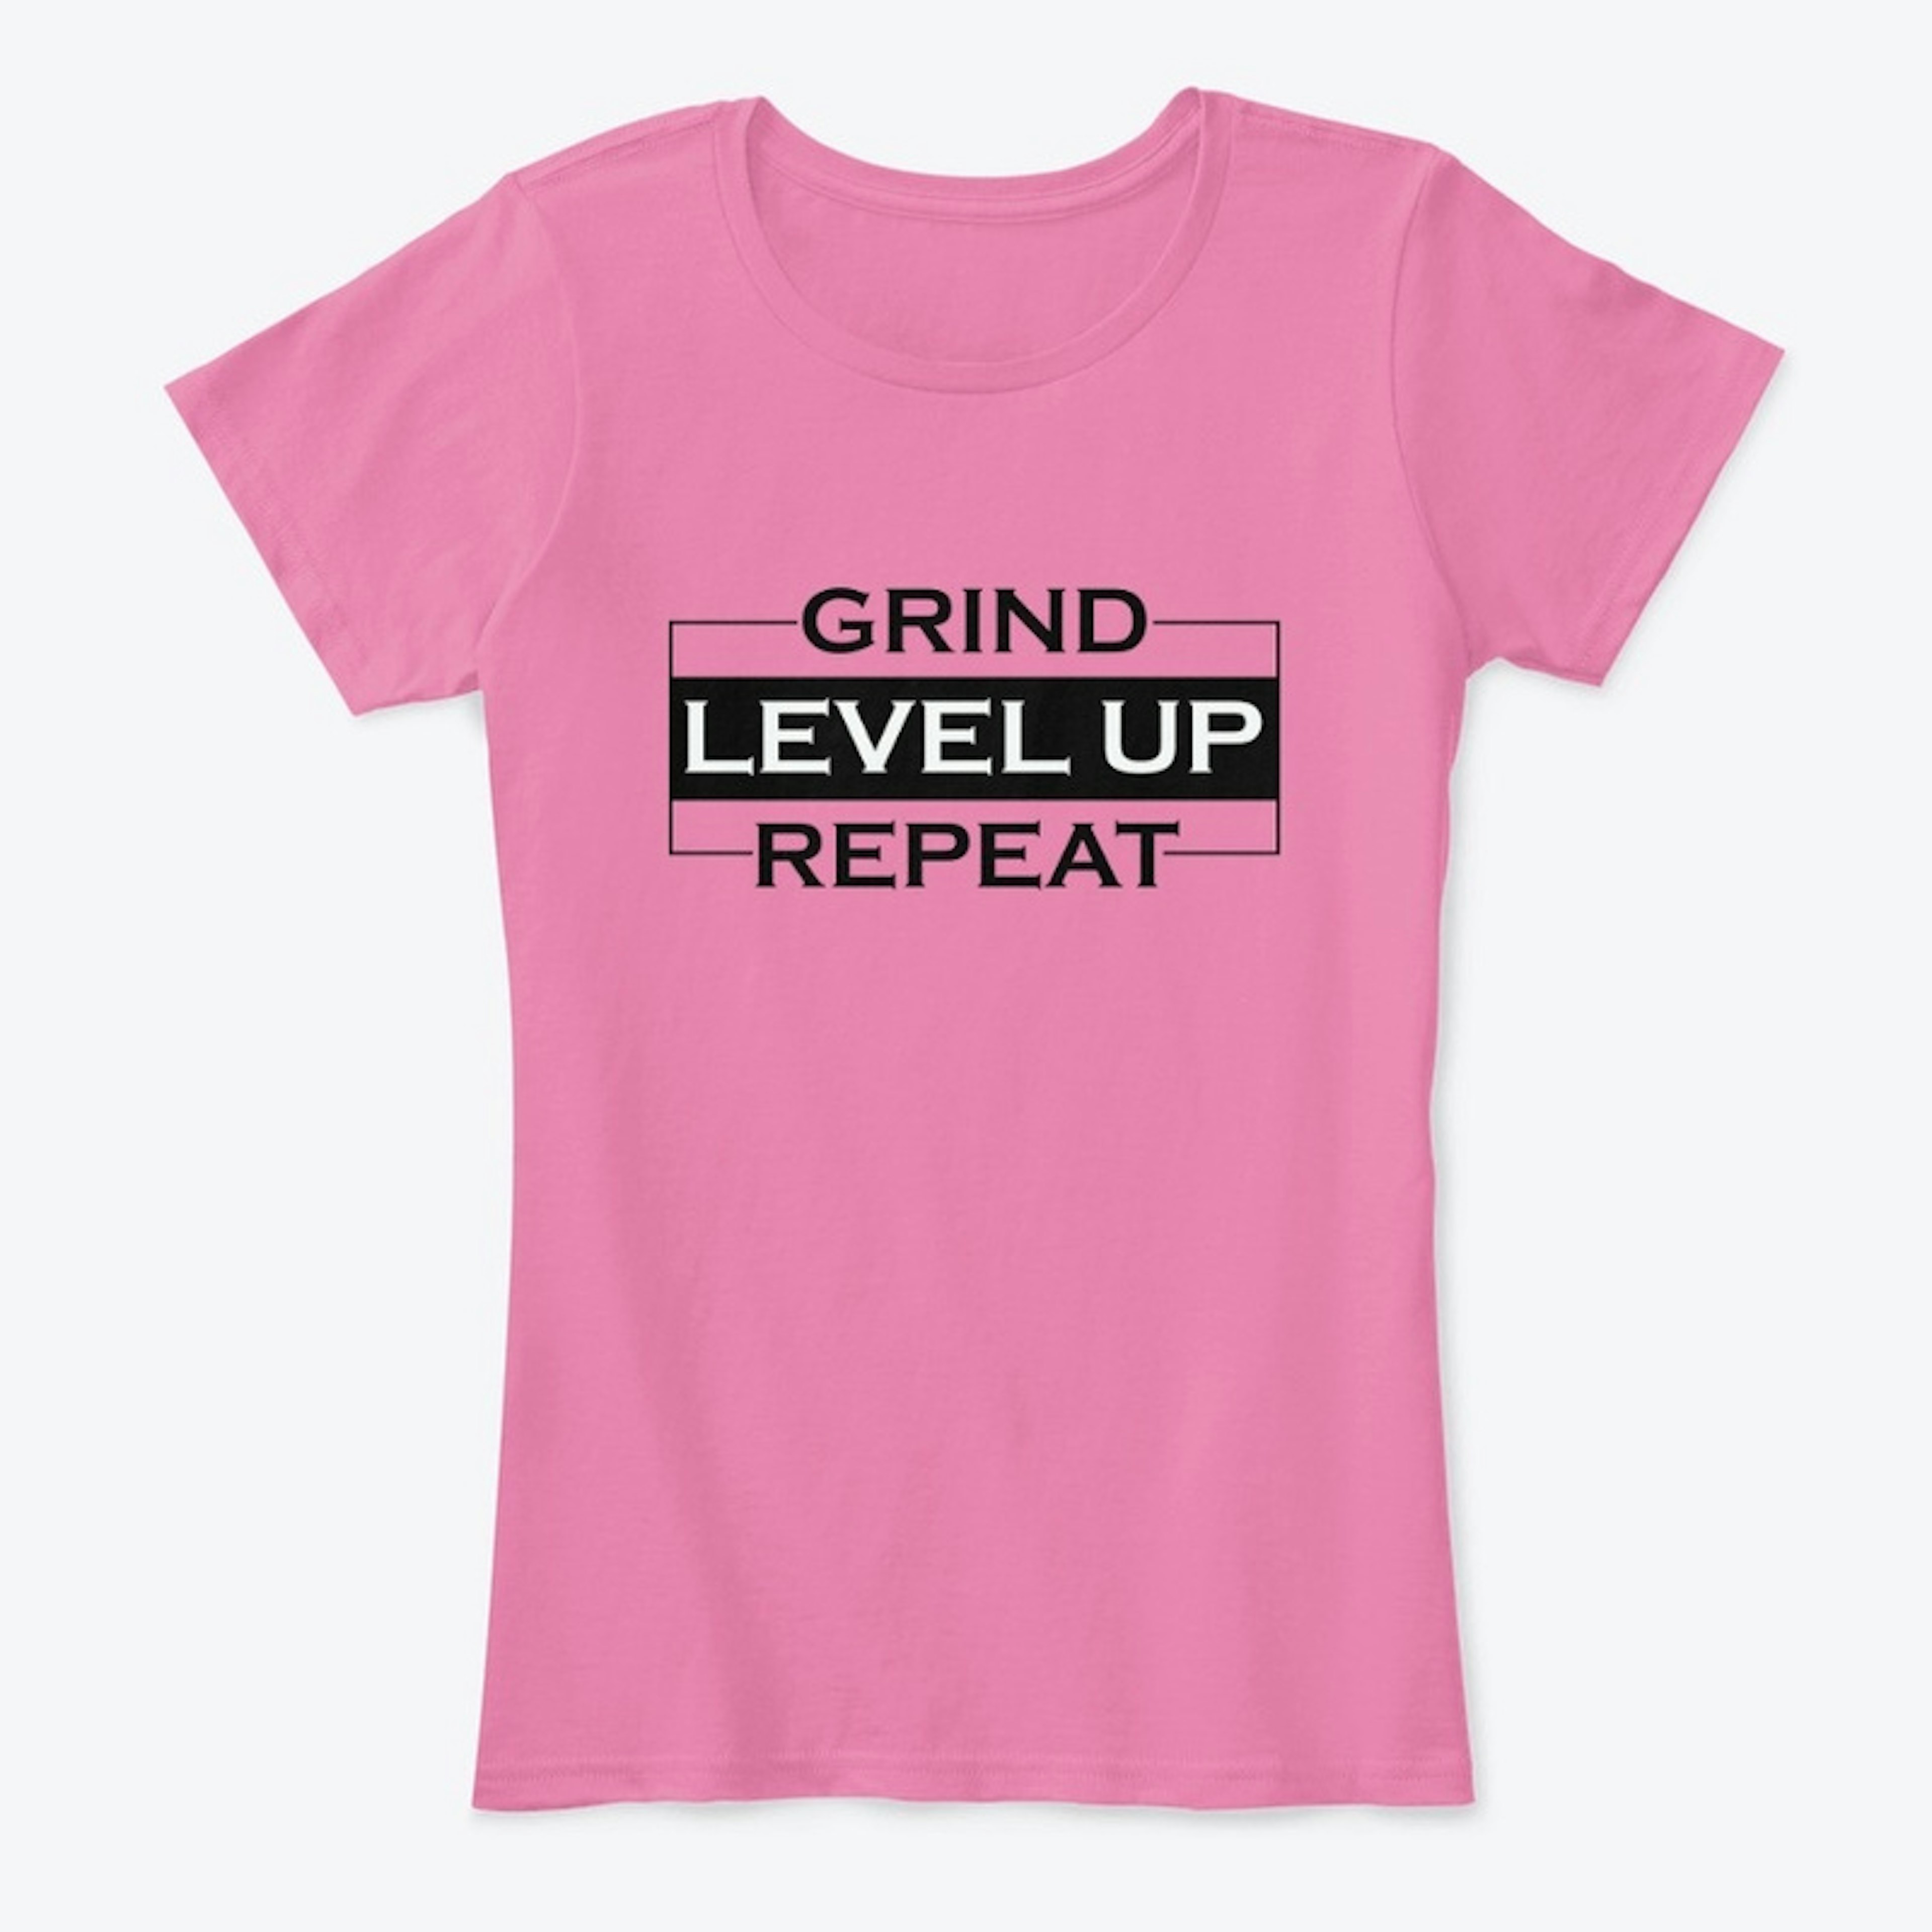 Grind - Level Up - Repeat